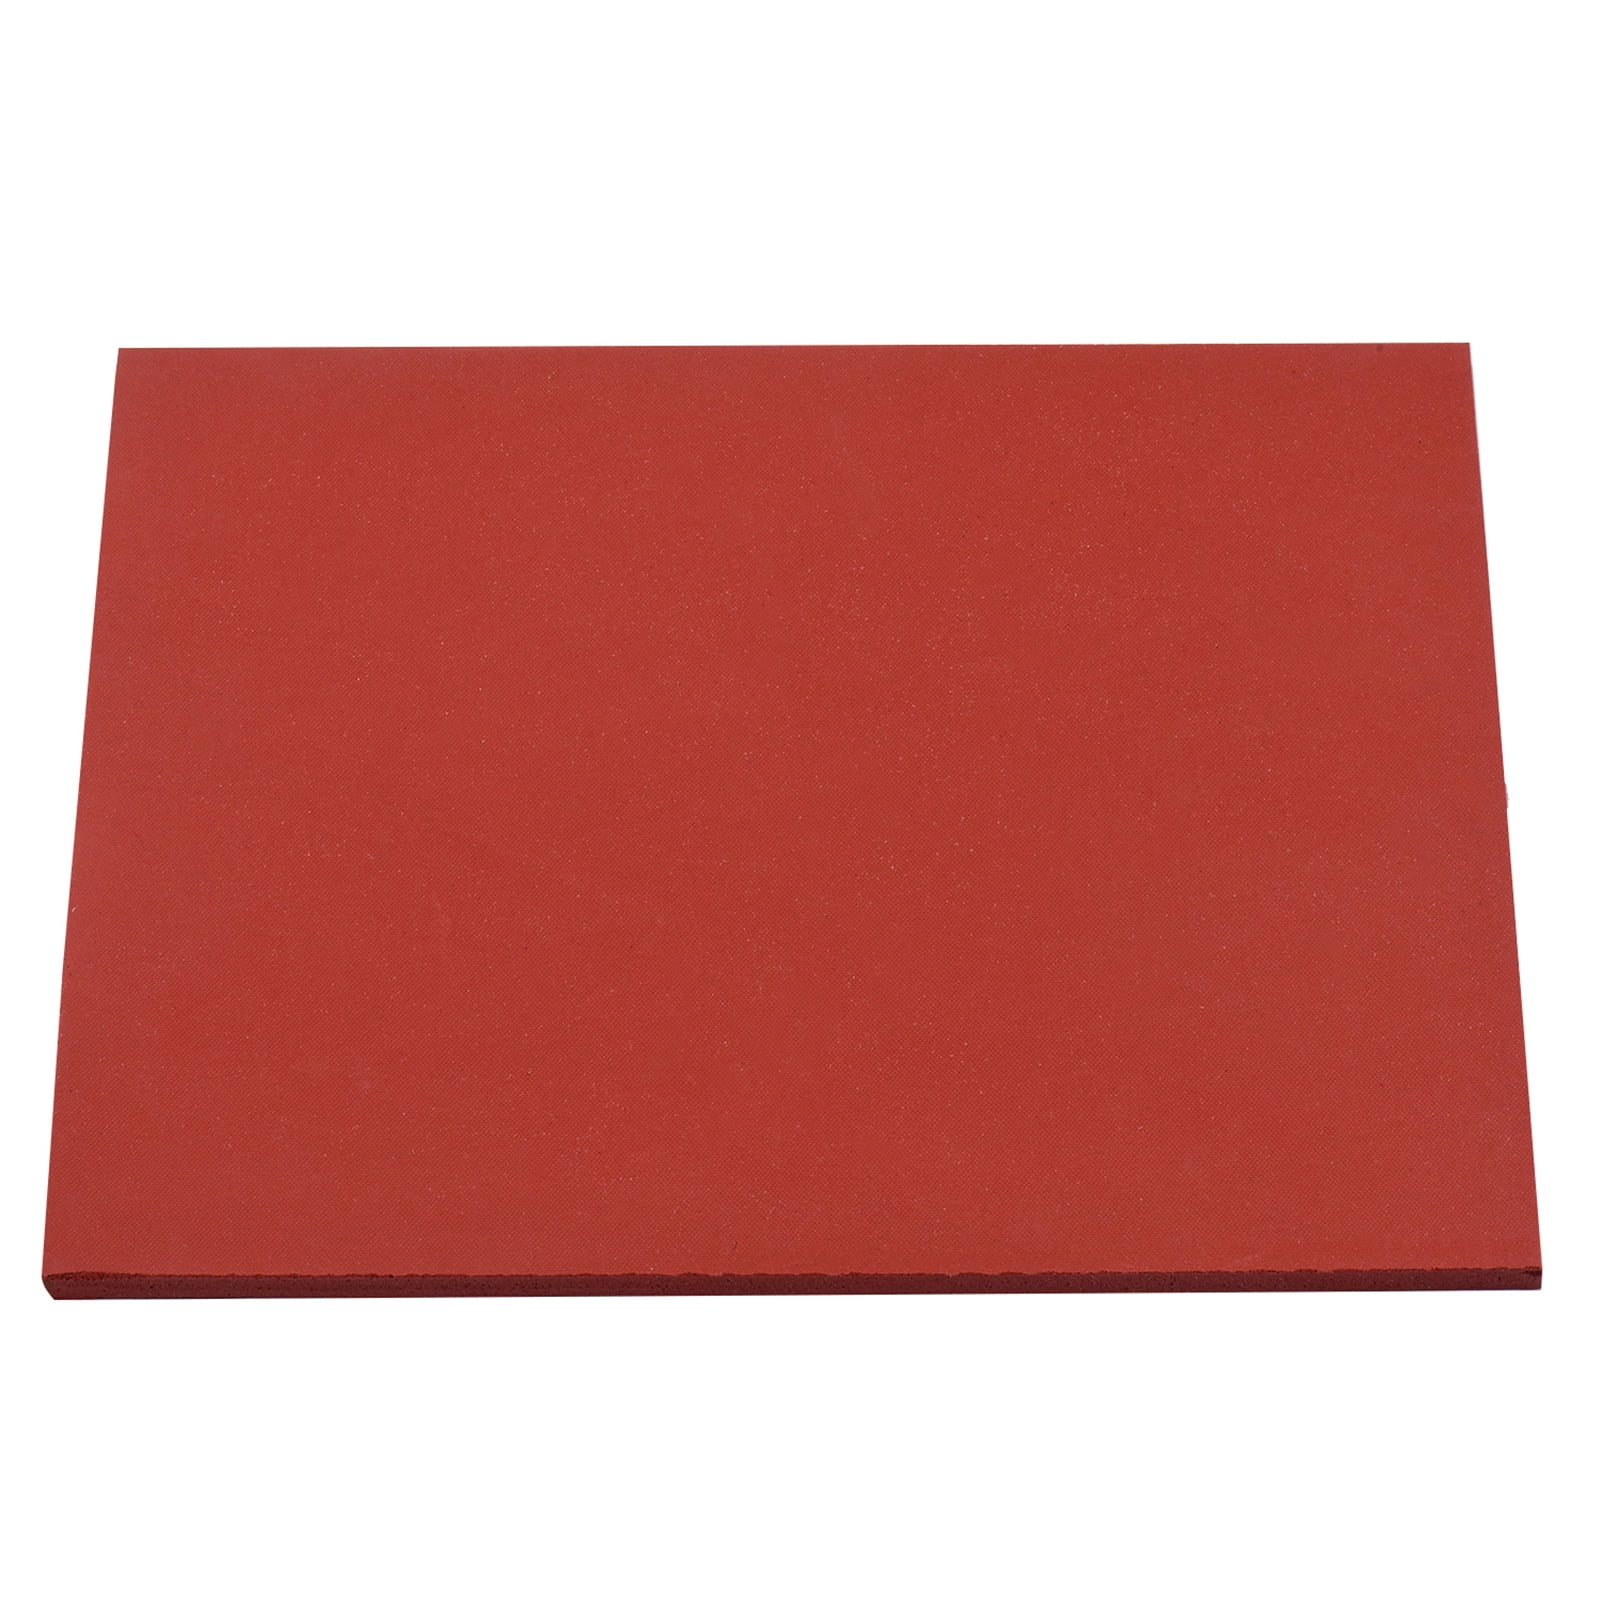 6.1 Heat Press Plate Pad Transfer Silicone Rubber Mat for Heating Press  Machine